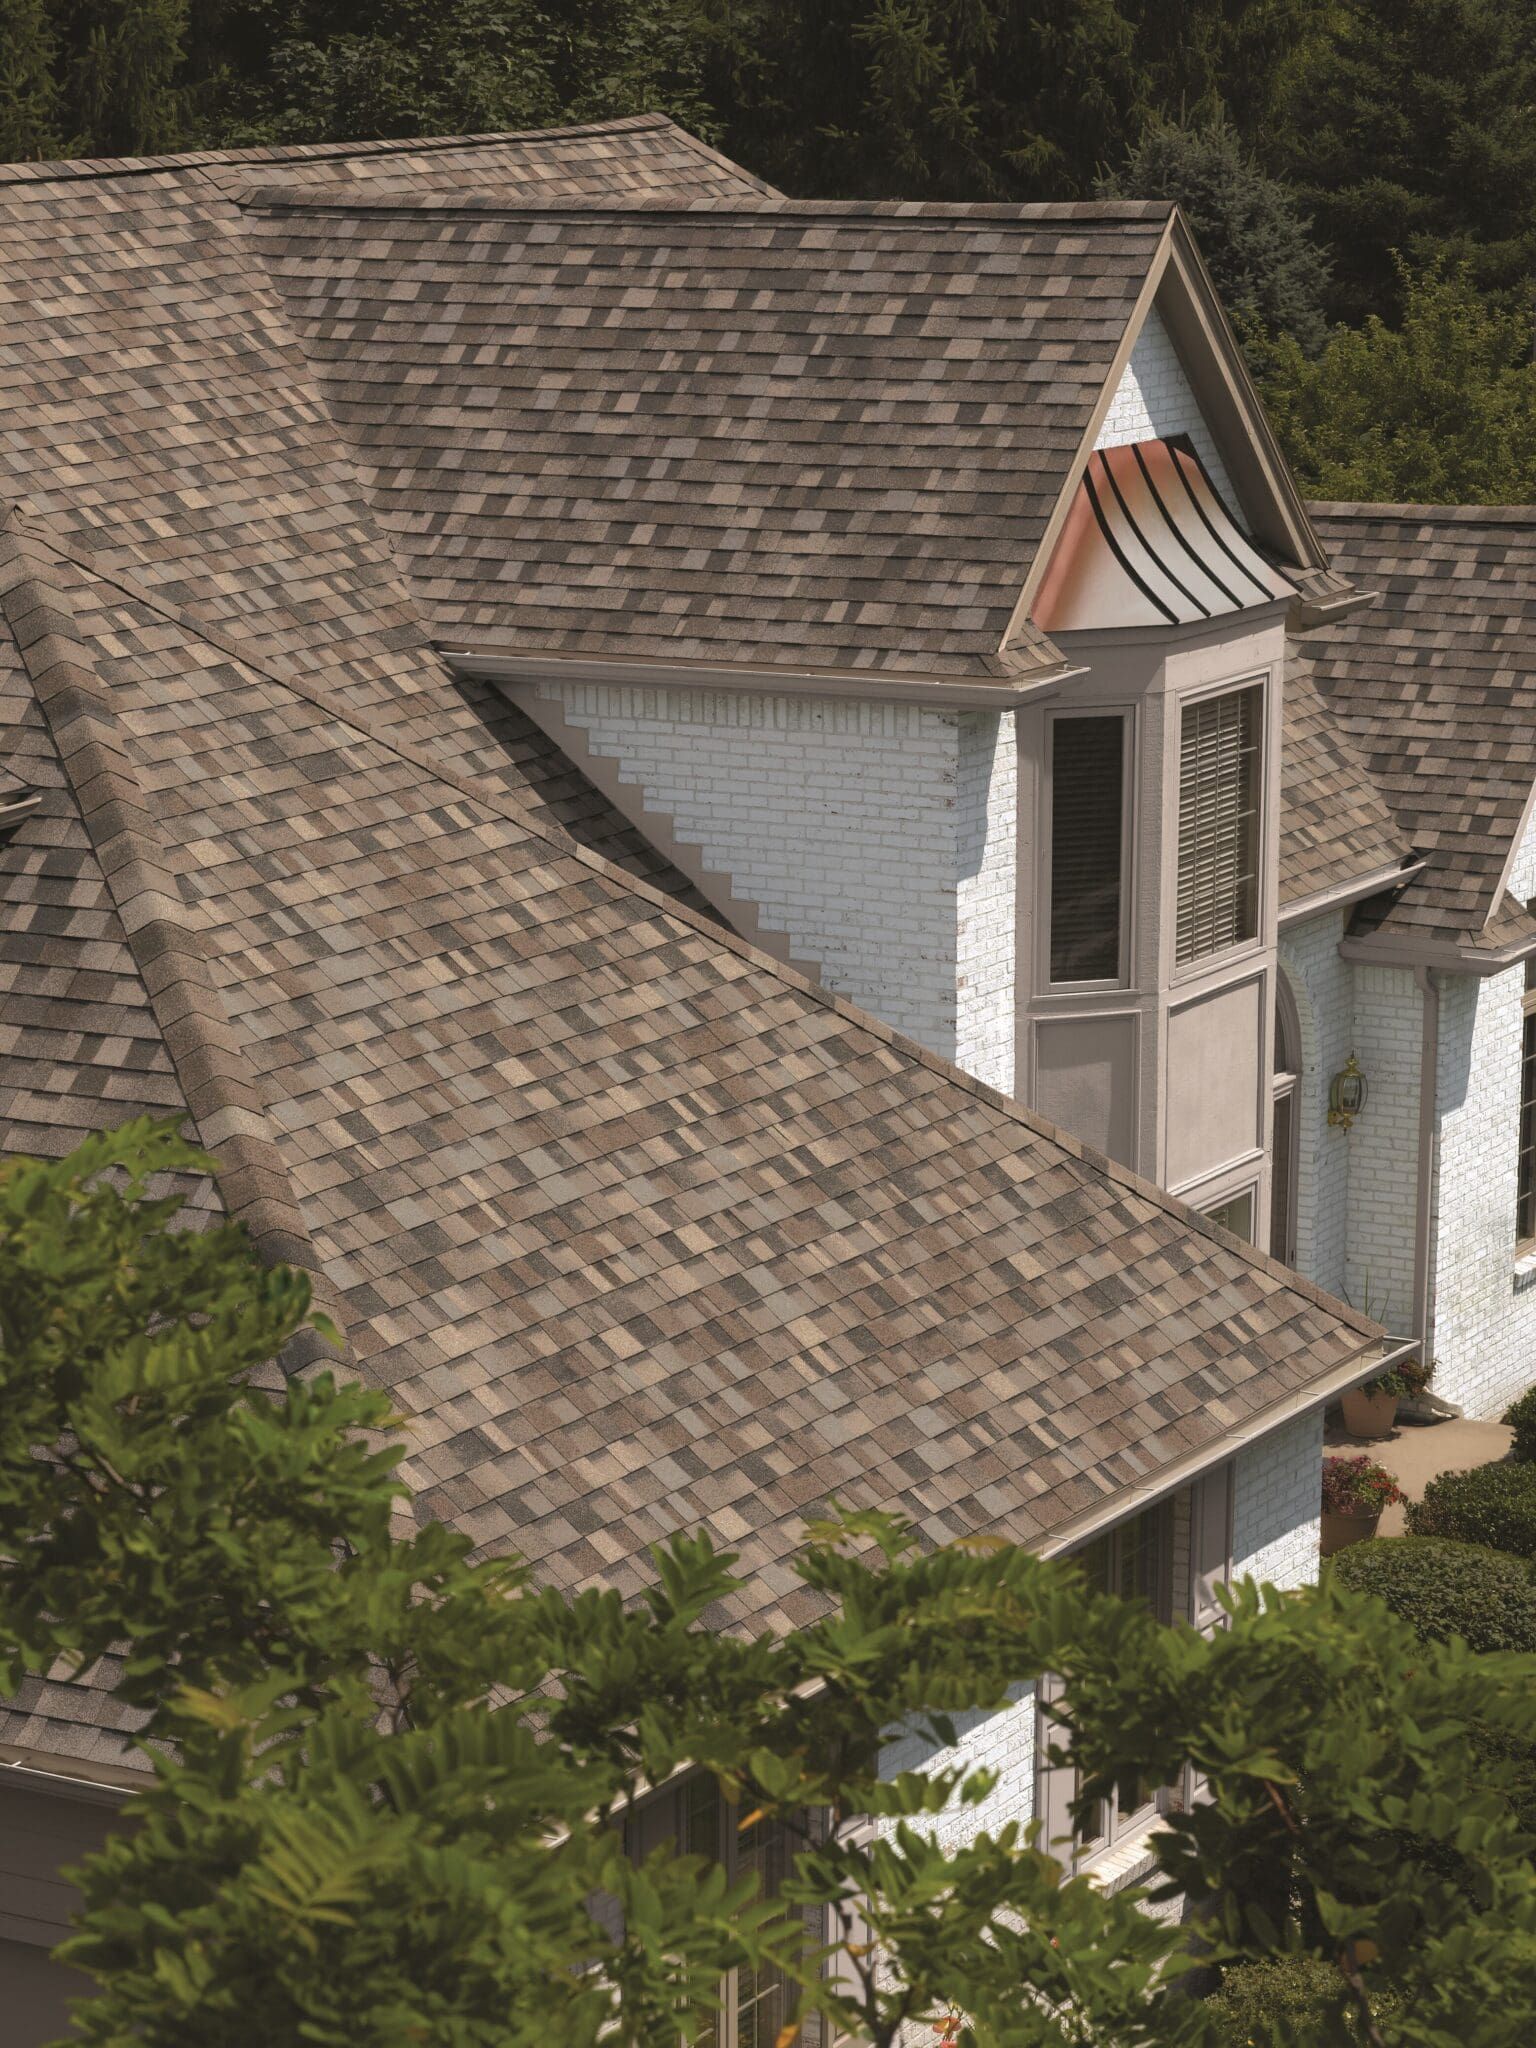 How long does it take to replace a roof?